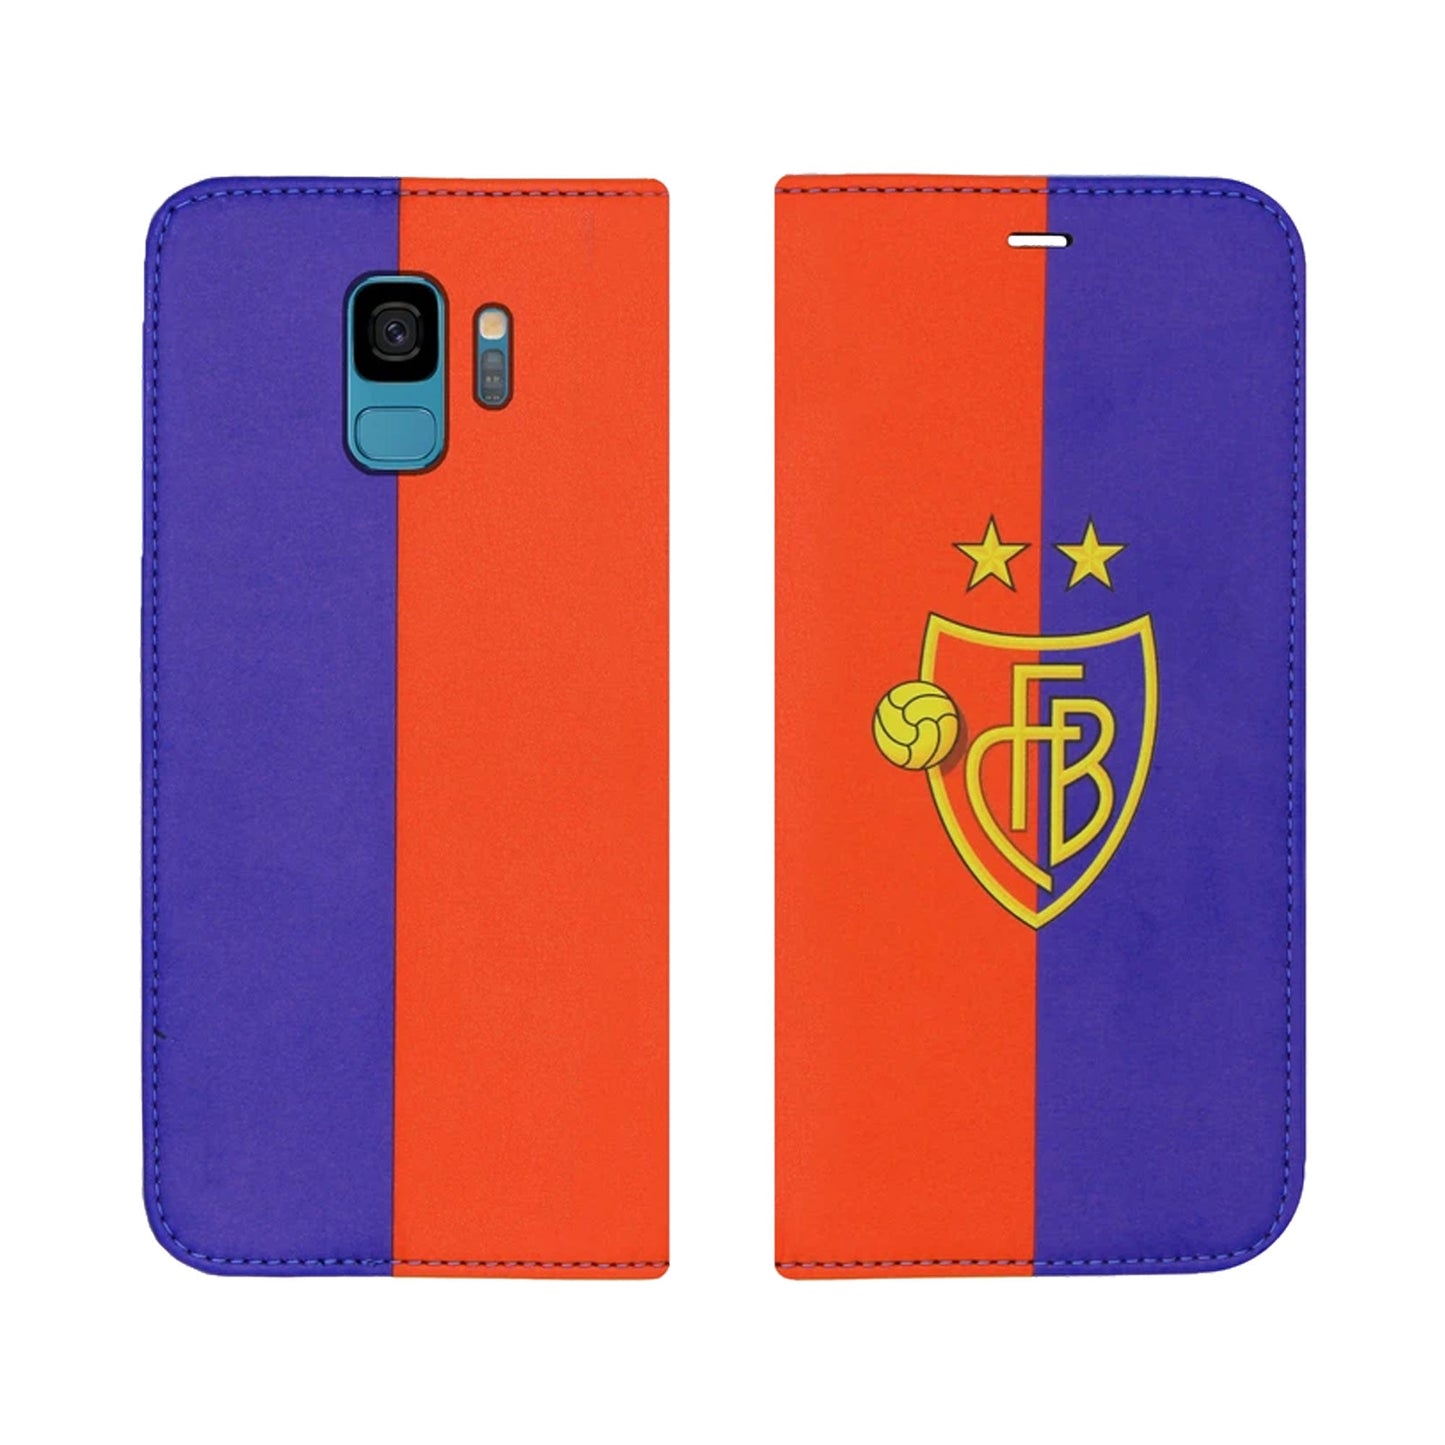 FCB red / blue panoramic case for Samsung Galaxy S9